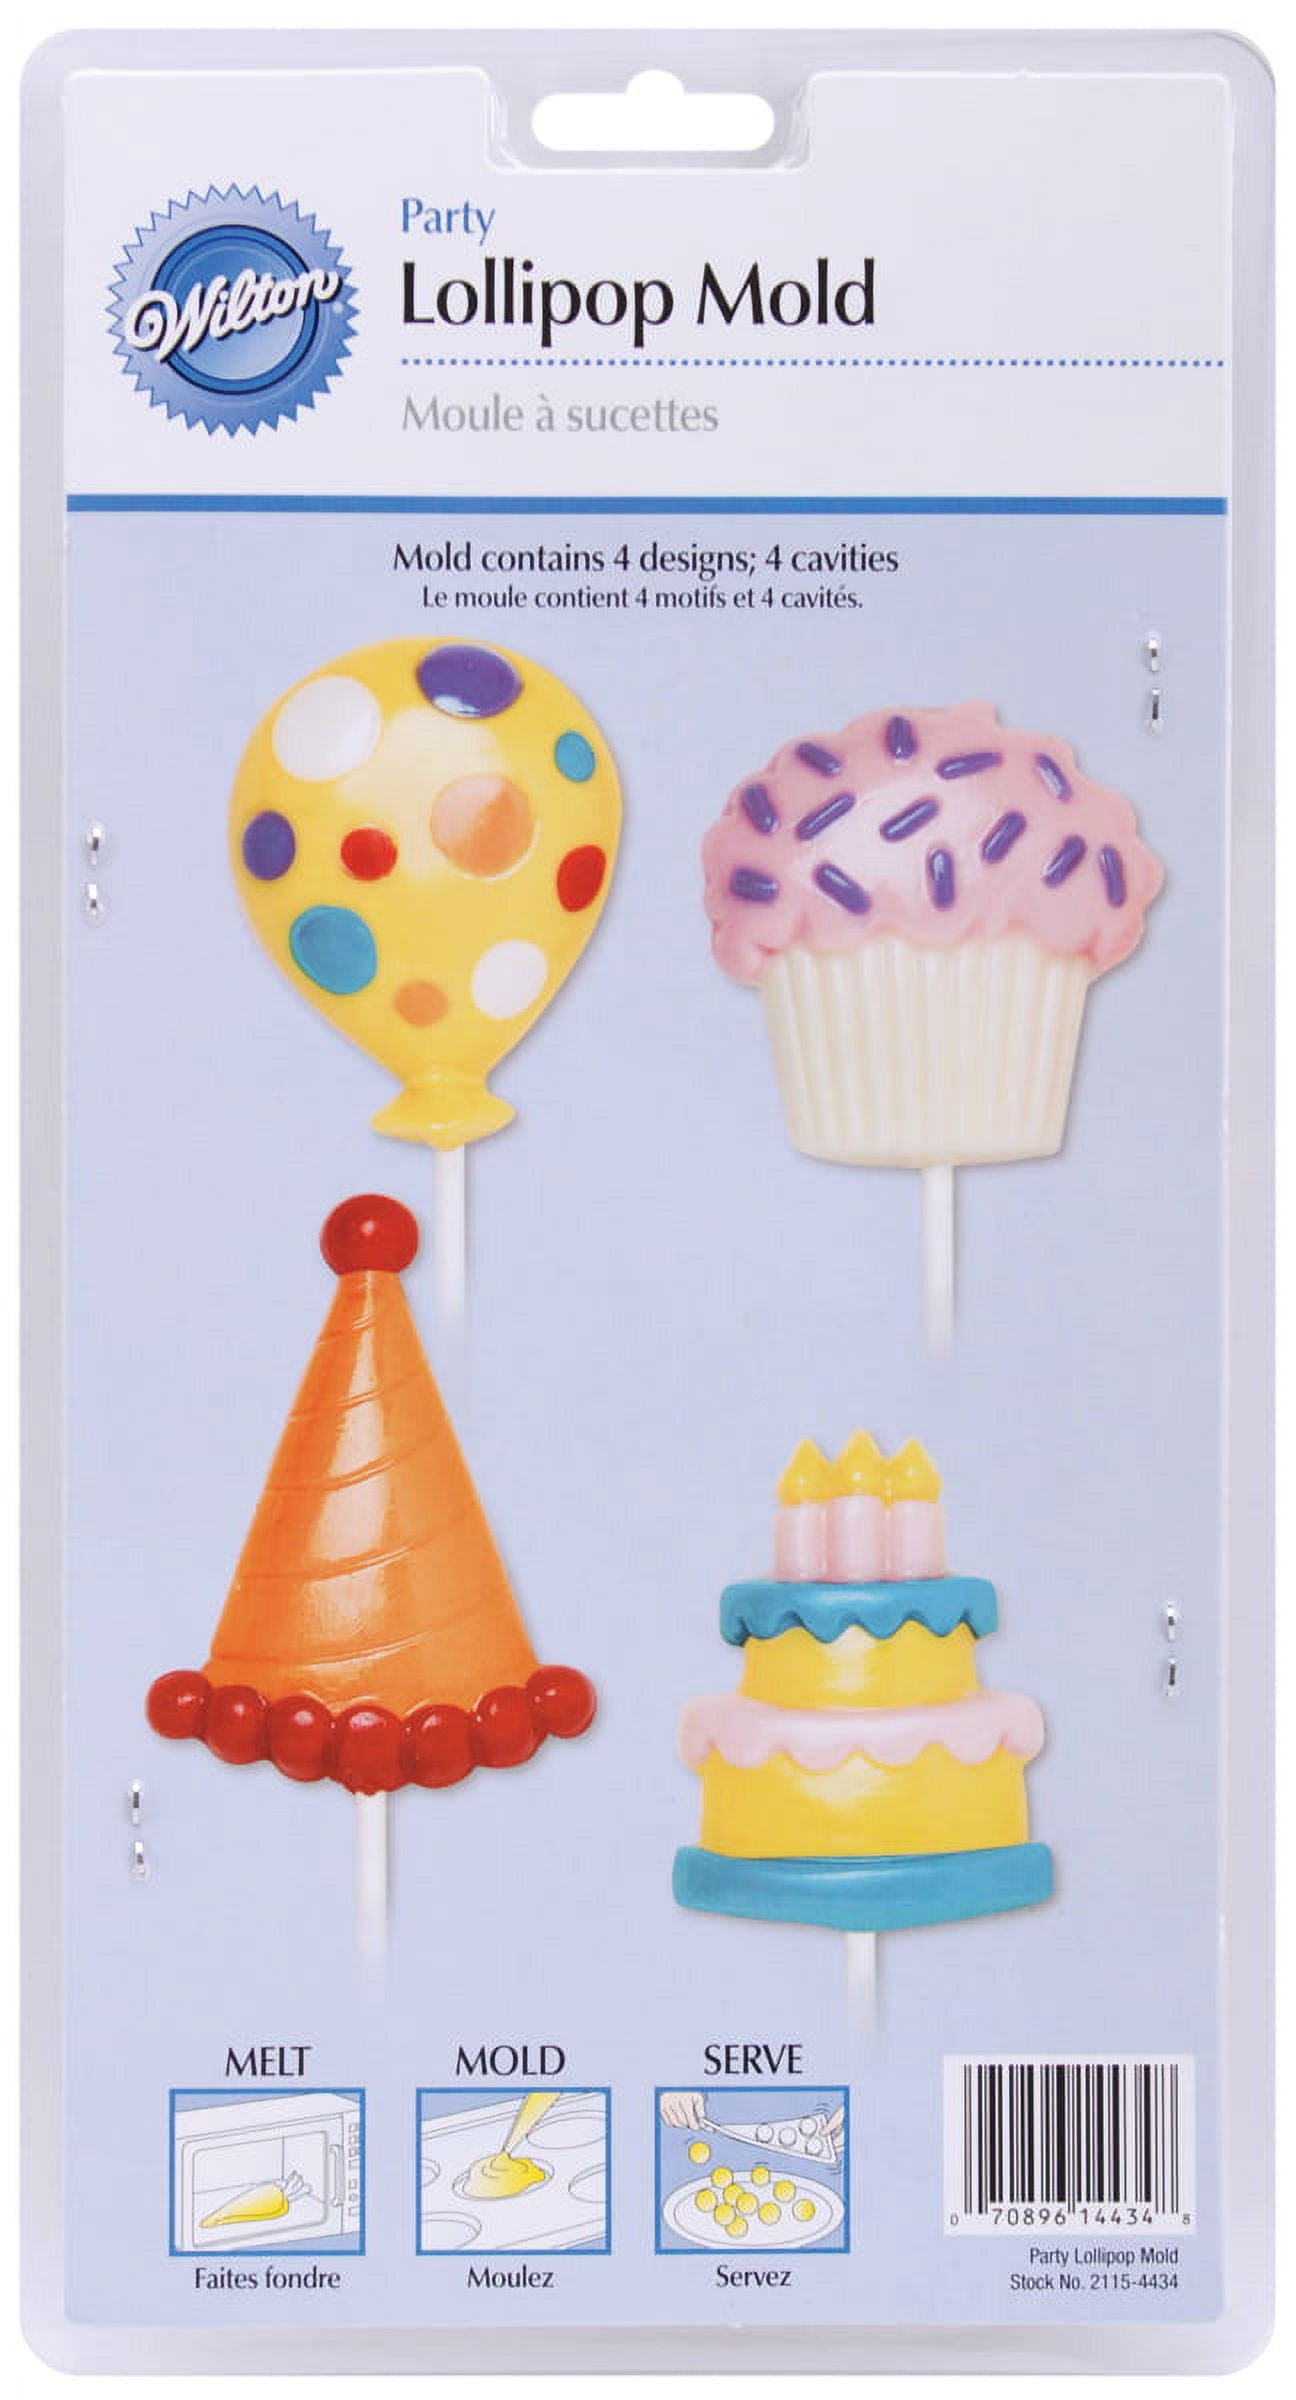 Wilton Candy Melts Candy Mold Set, Party Pack 8 Ct. - Mia Cake House